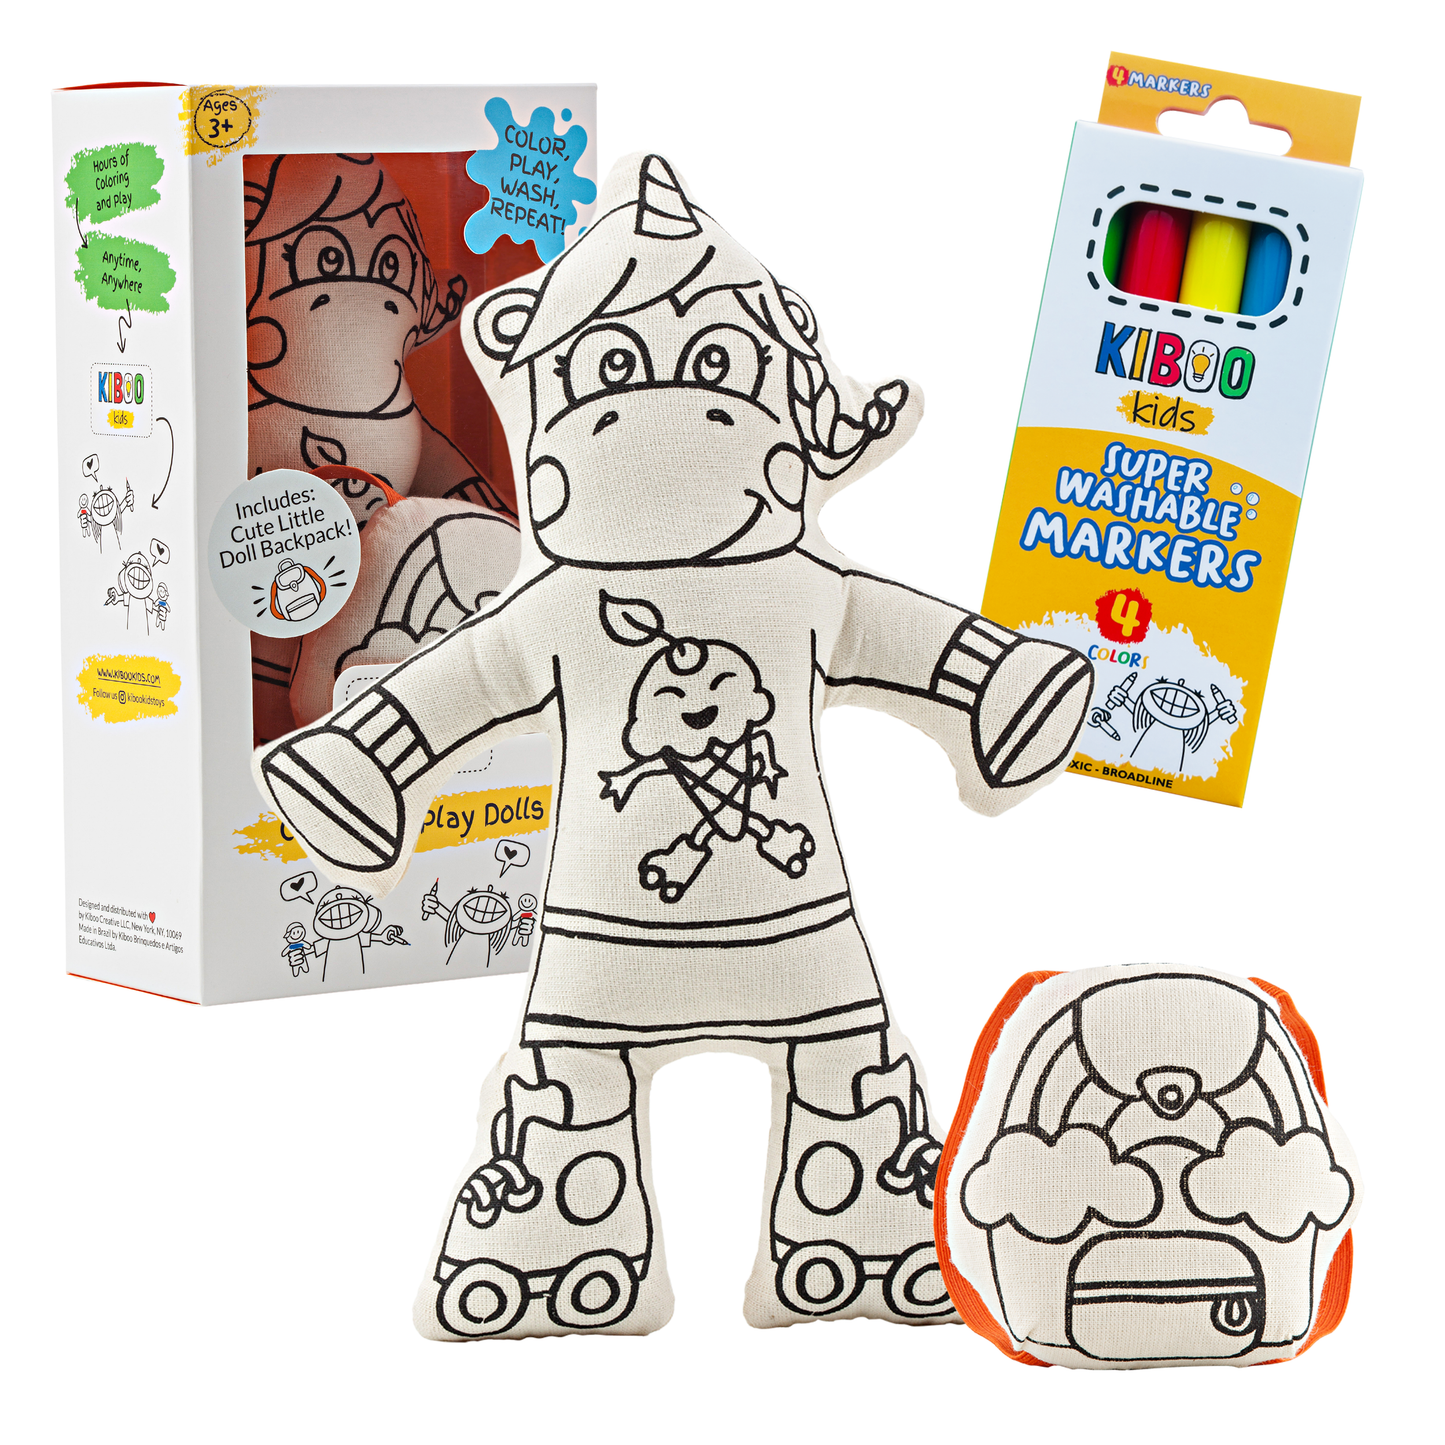 Kiboo Kids: Unicorn with Mini Rainbow Backpack - Colorable and Washable Doll for Creative Play